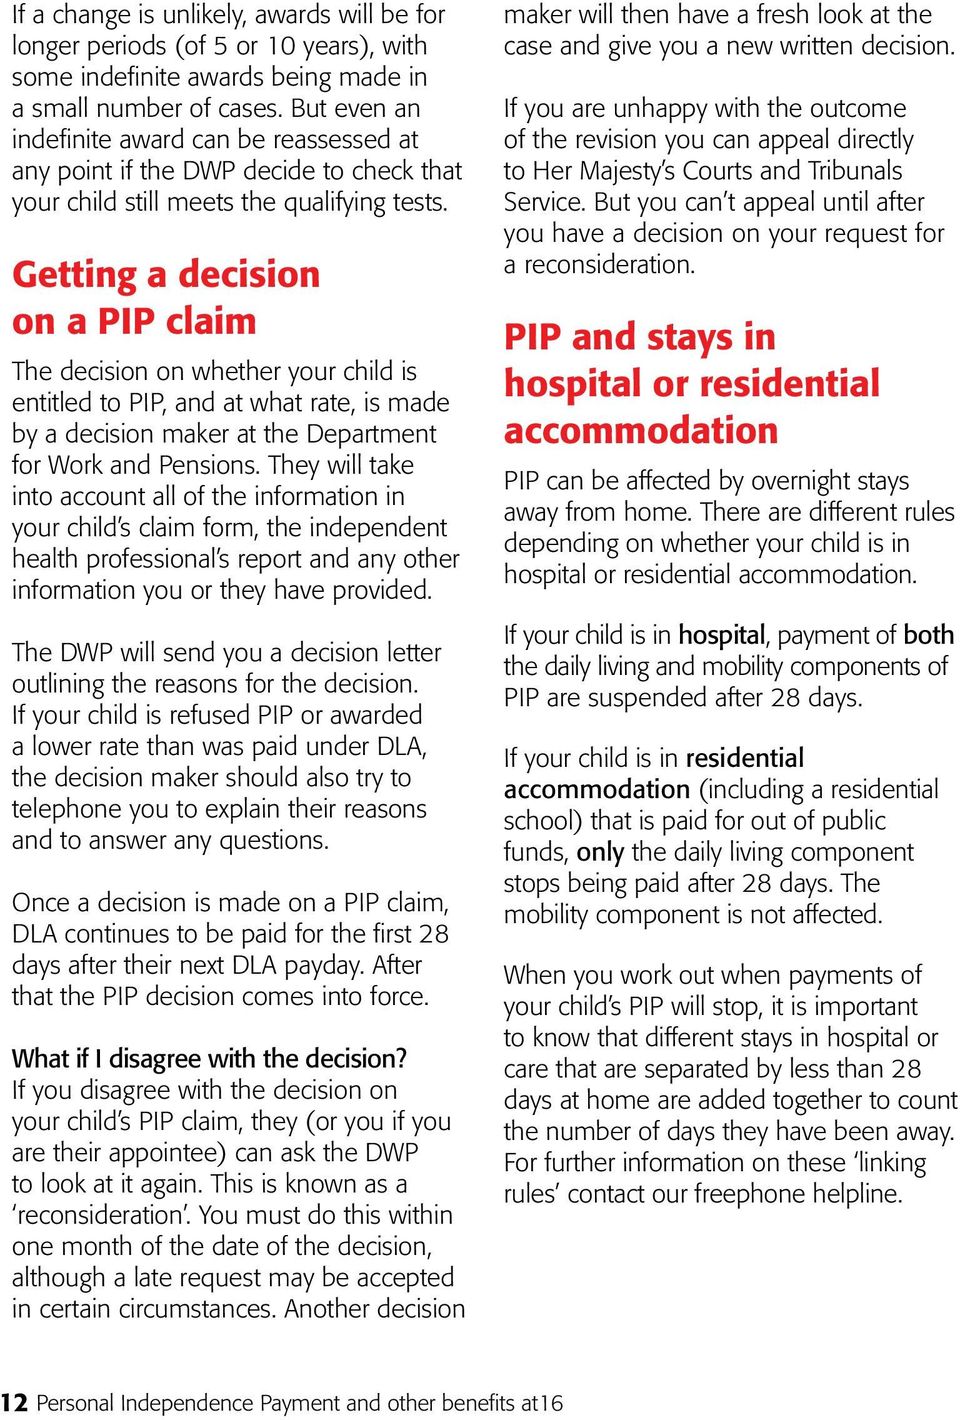 Getting a decision on a PIP claim The decision on whether your child is entitled to PIP, and at what rate, is made by a decision maker at the Department for Work and Pensions.